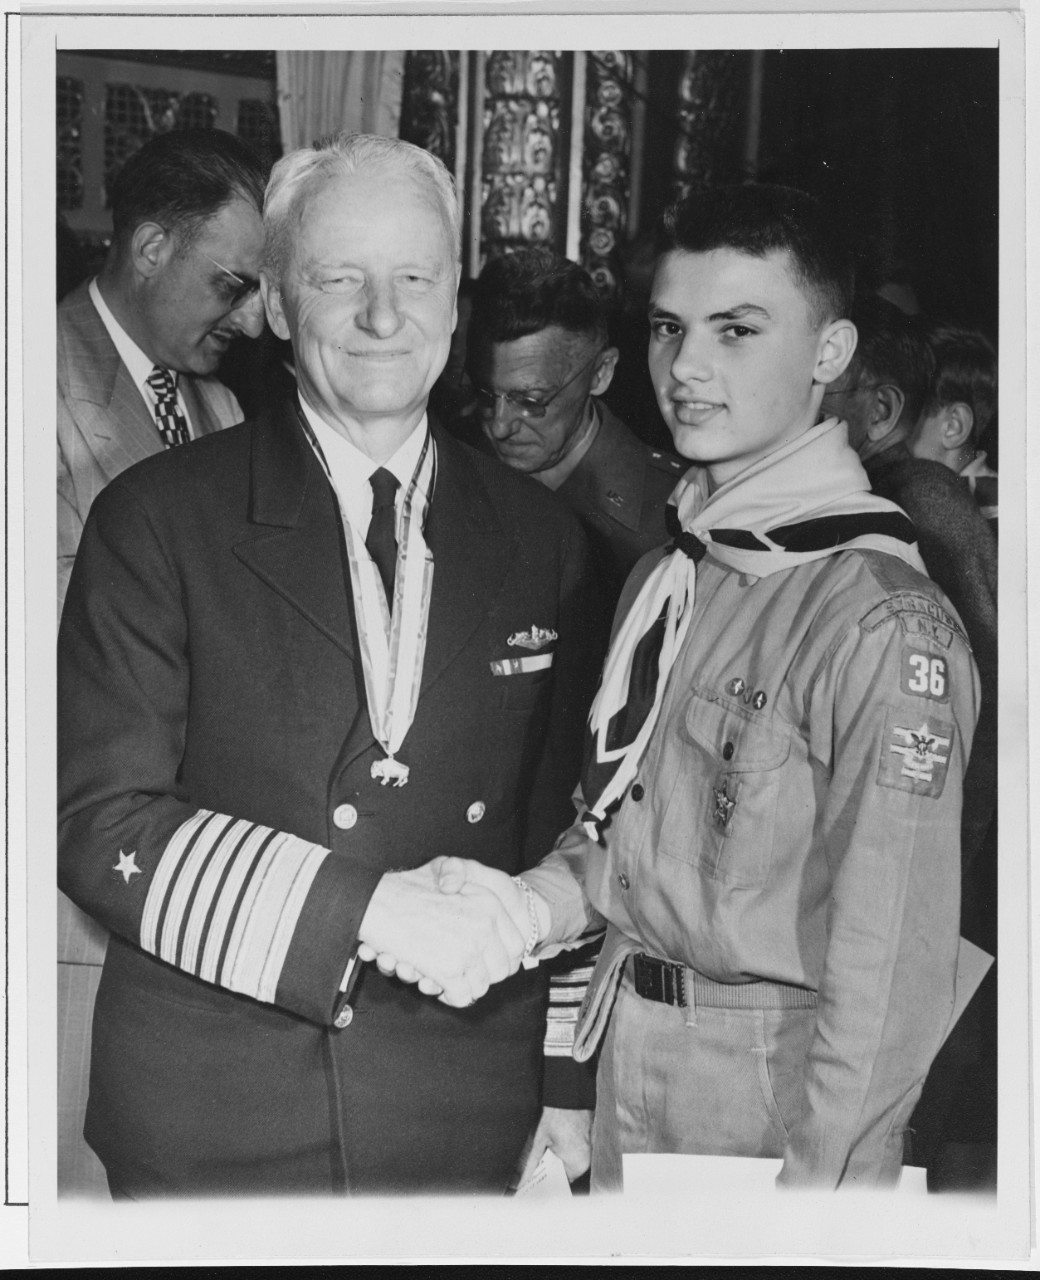 Fleet Admiral Nimitz Shakes Hands with a Star Boy Scout